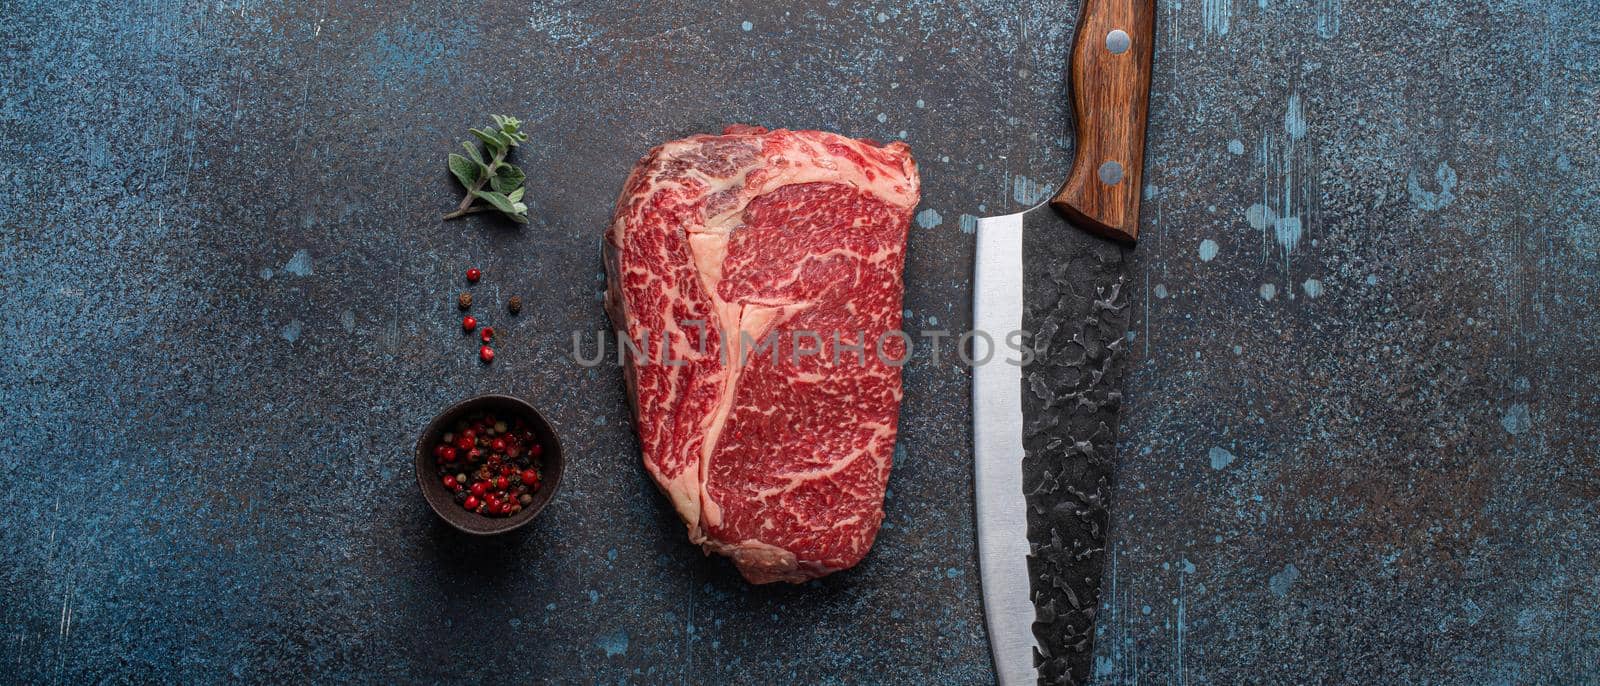 Raw meat beef marbled prime cut steak Ribeye on rustic concrete kitchen table background from above with big knife and spices, beefsteak concept